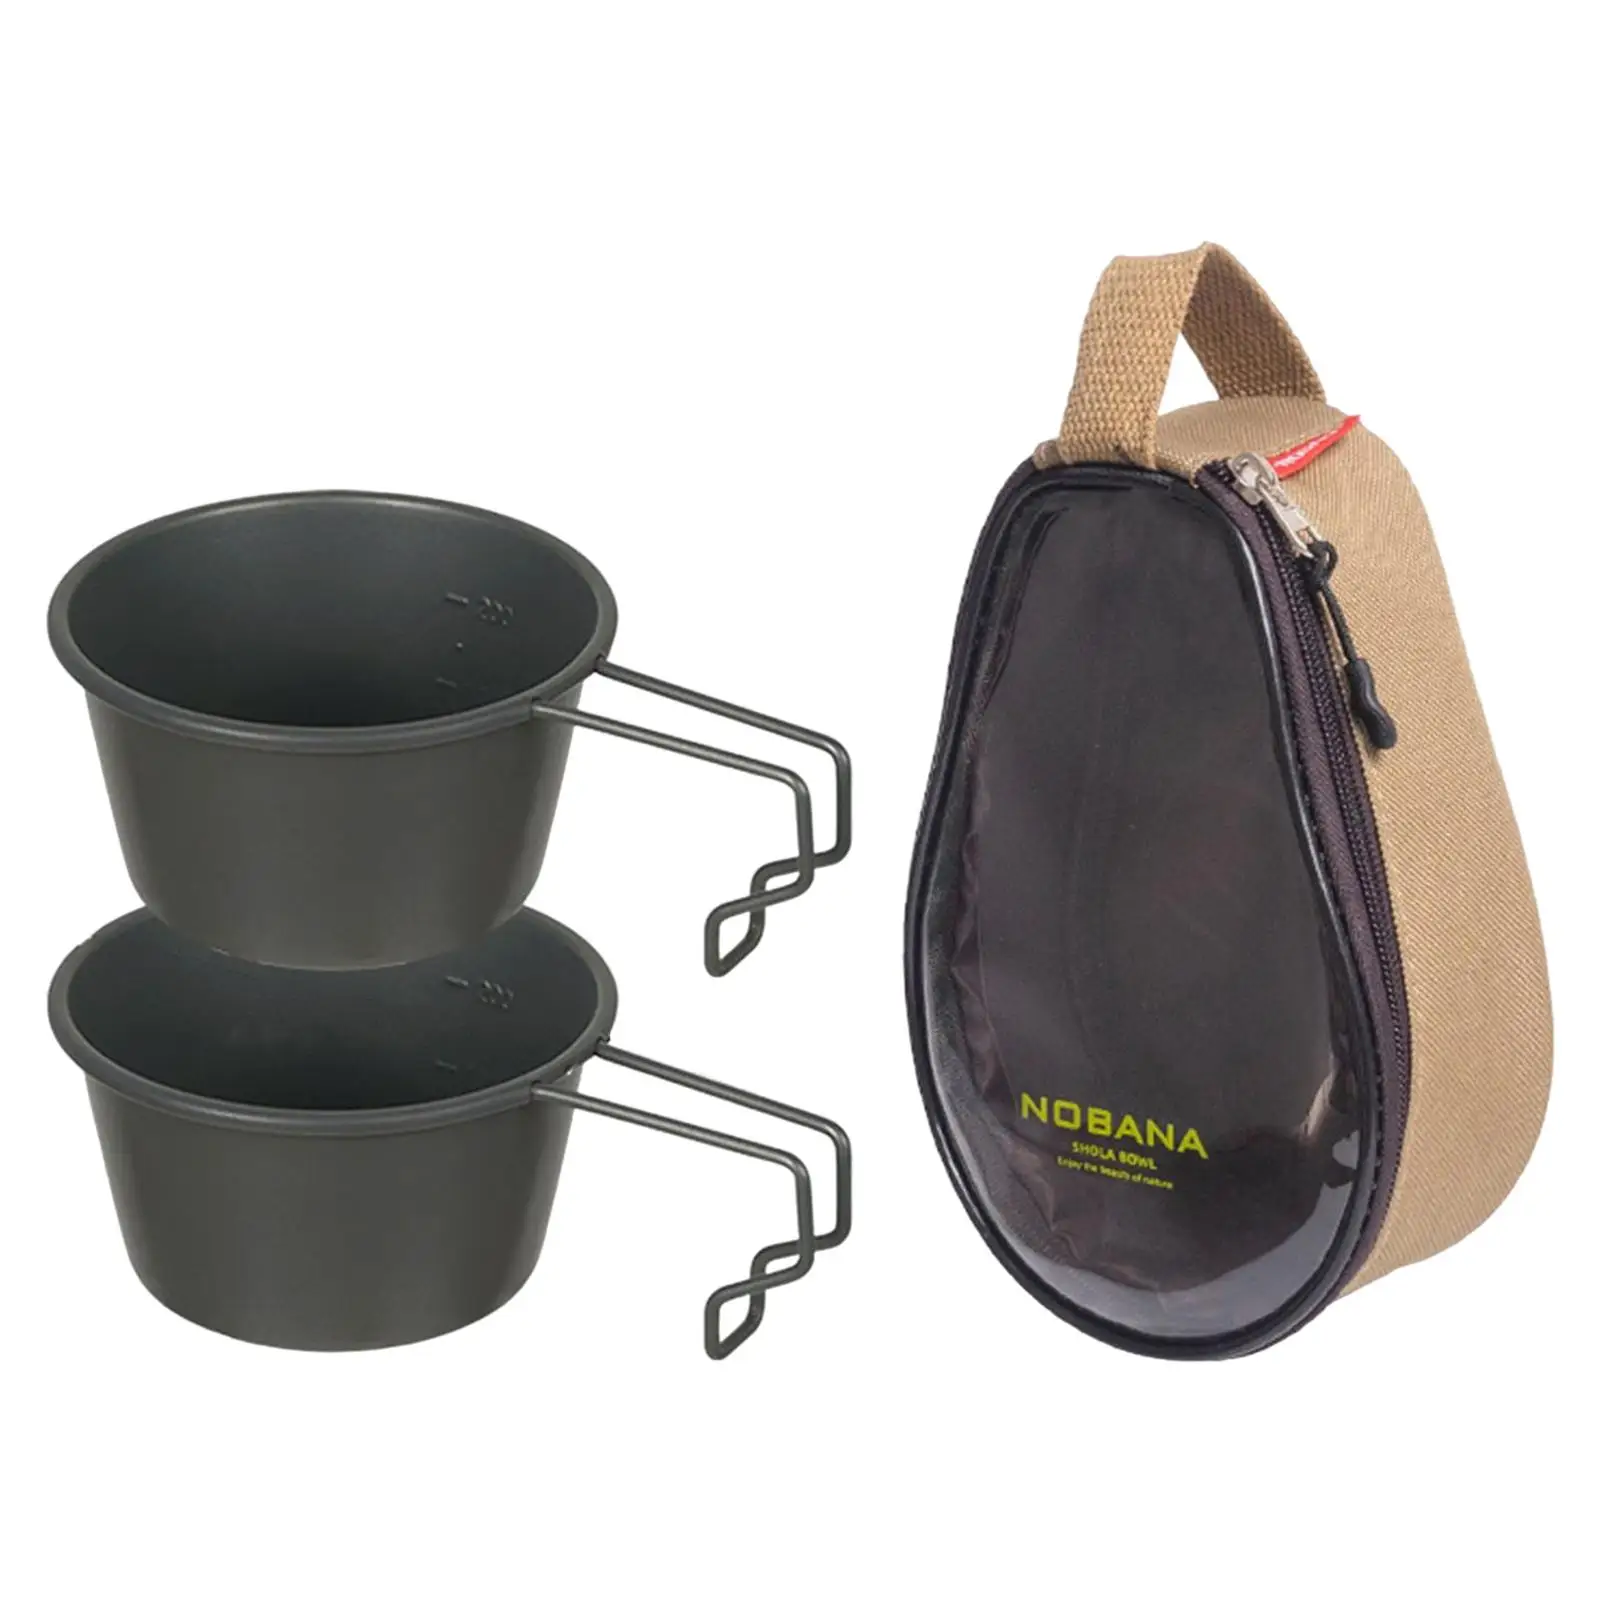 3pcs Outdoor Stainless Steel Bowl Picnic Tableware Barbecue Hiking Camping Cup Picnic Cookware Storage Bag